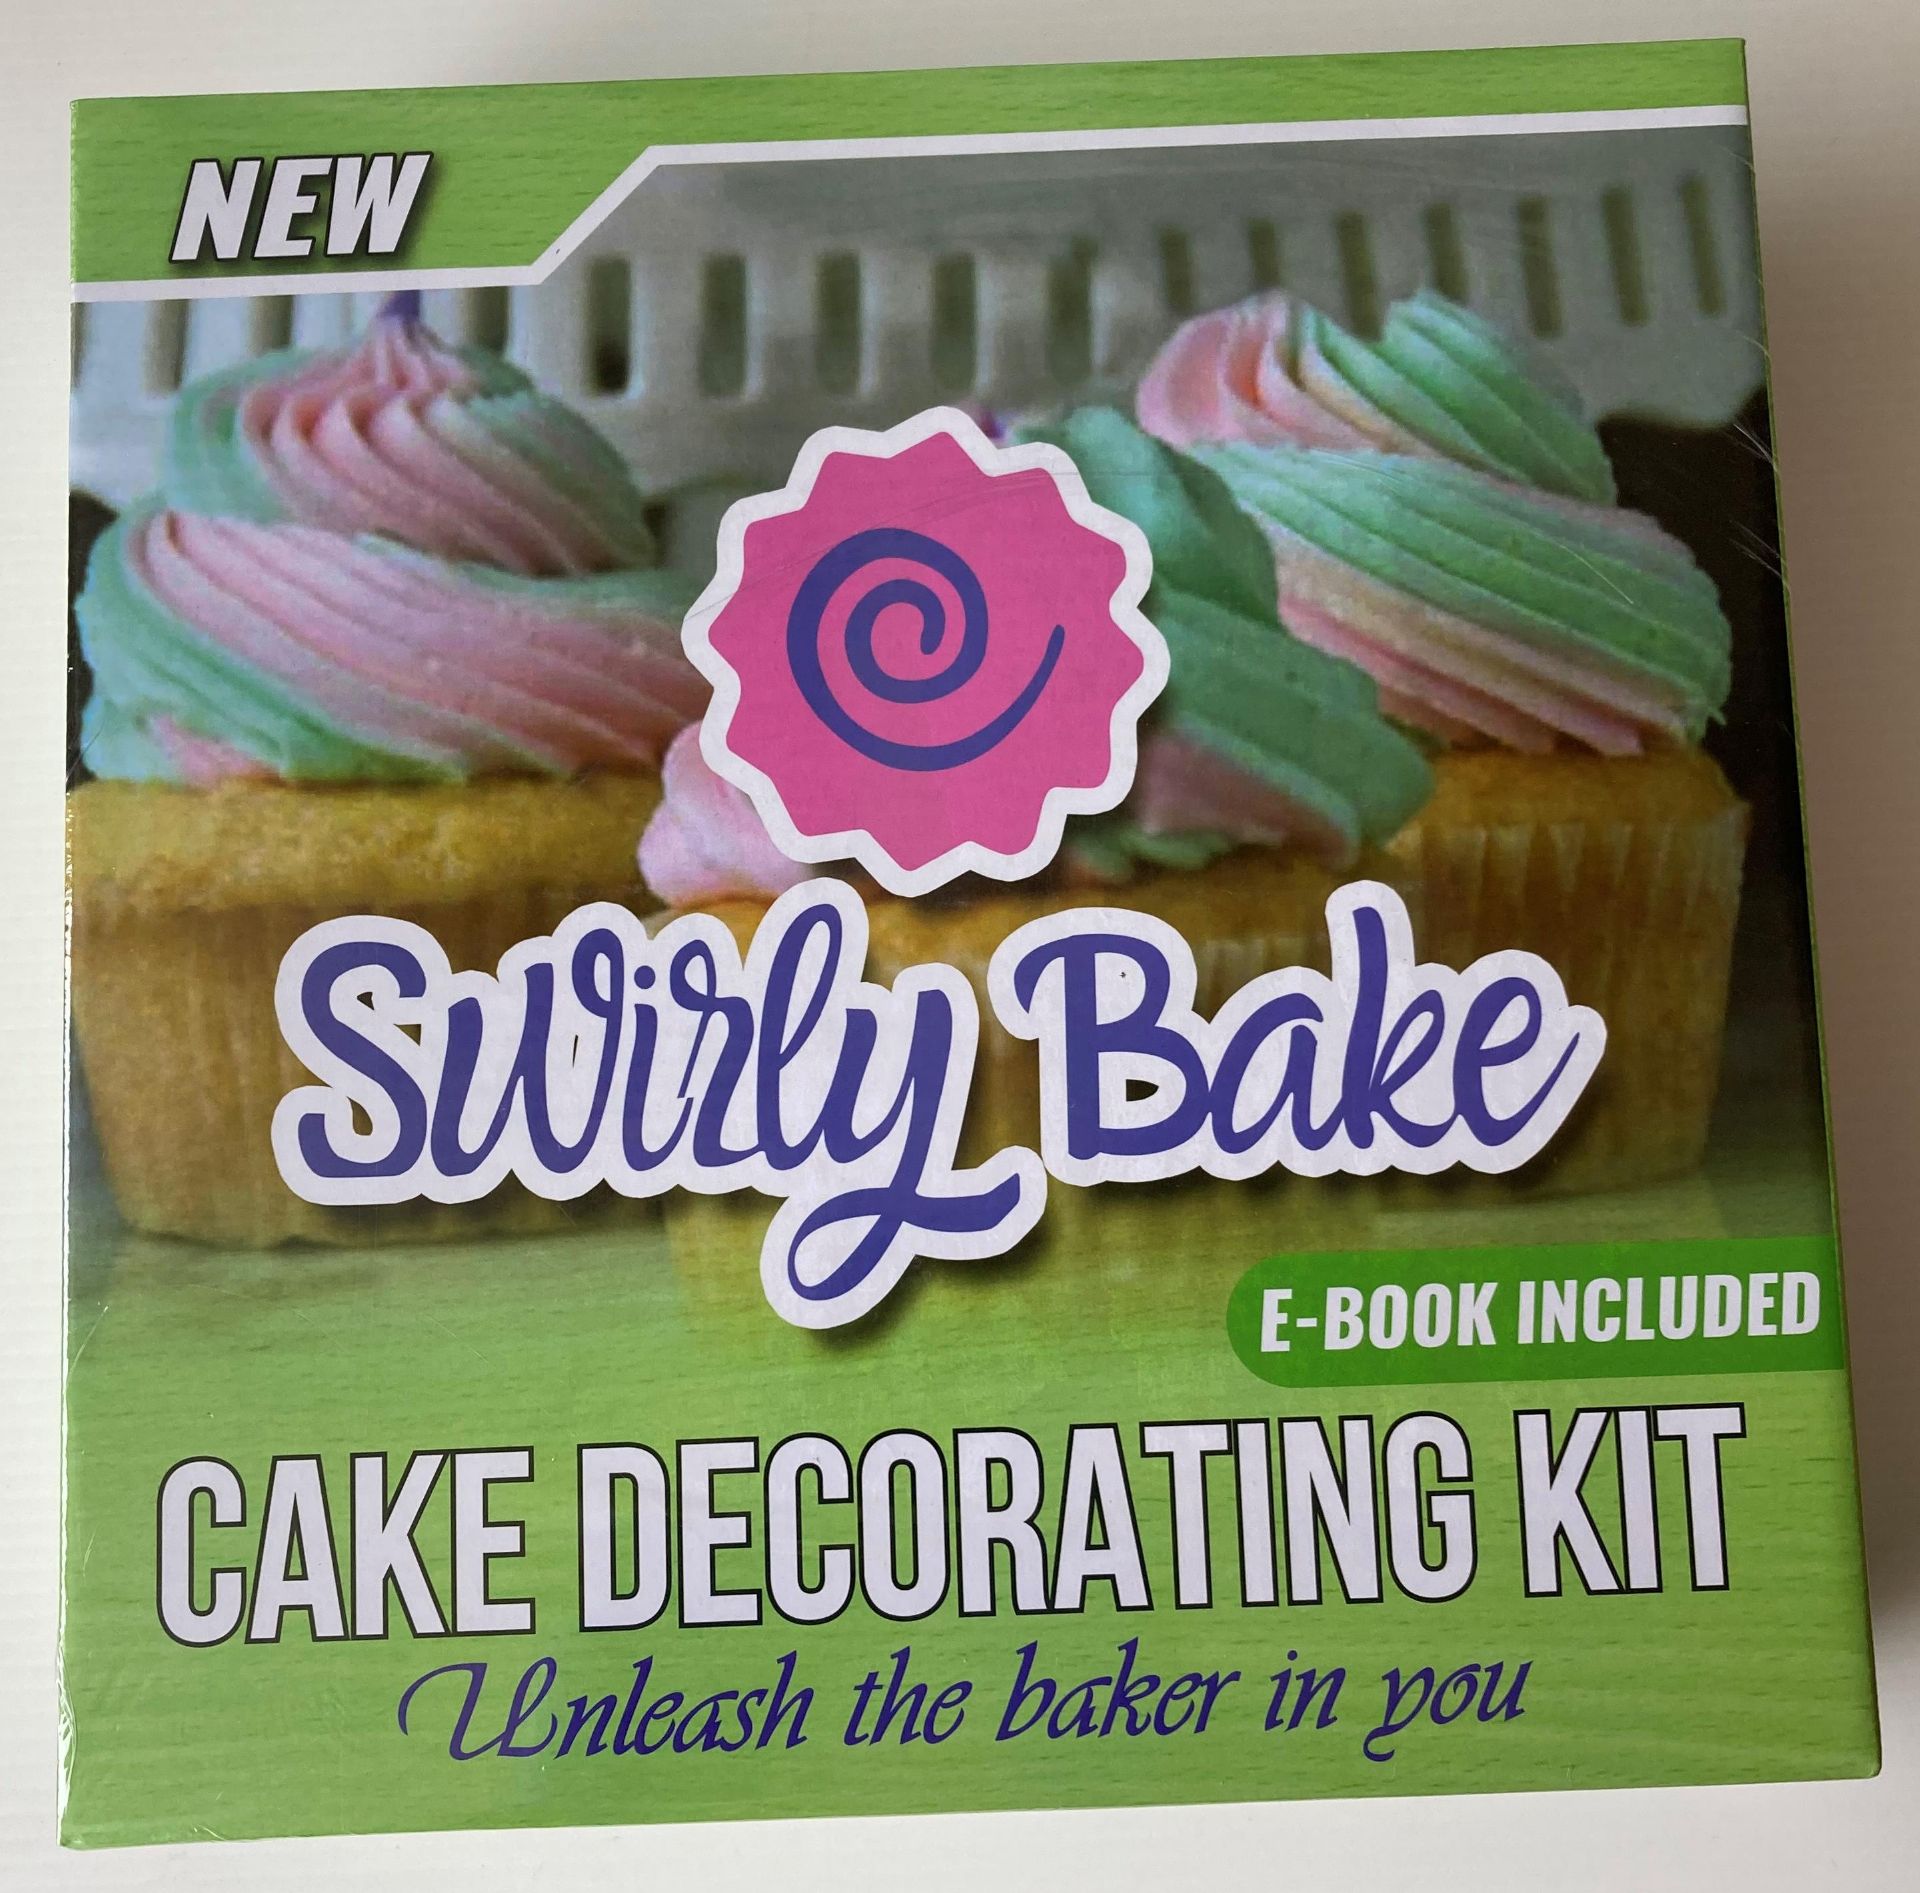 16 x Swirly Bake Cake Decorating Kits (E-book included) (1 x outer box) (saleroom location: